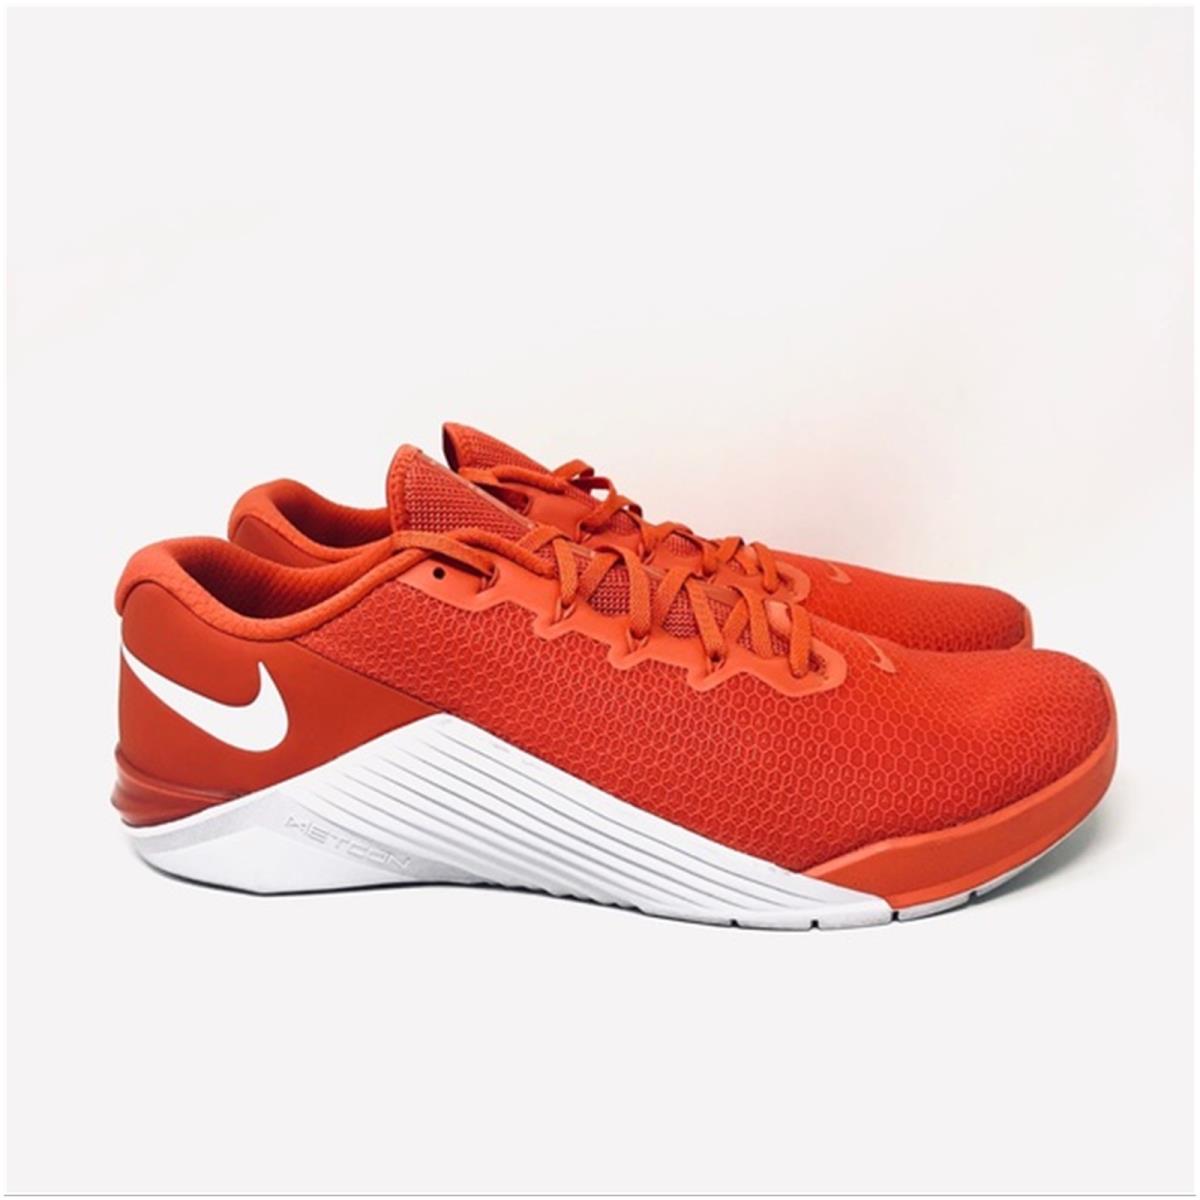 Nike Metcon 5 <AQ1189 - 891>.UNISEX Adults Athletic Shoes with Box